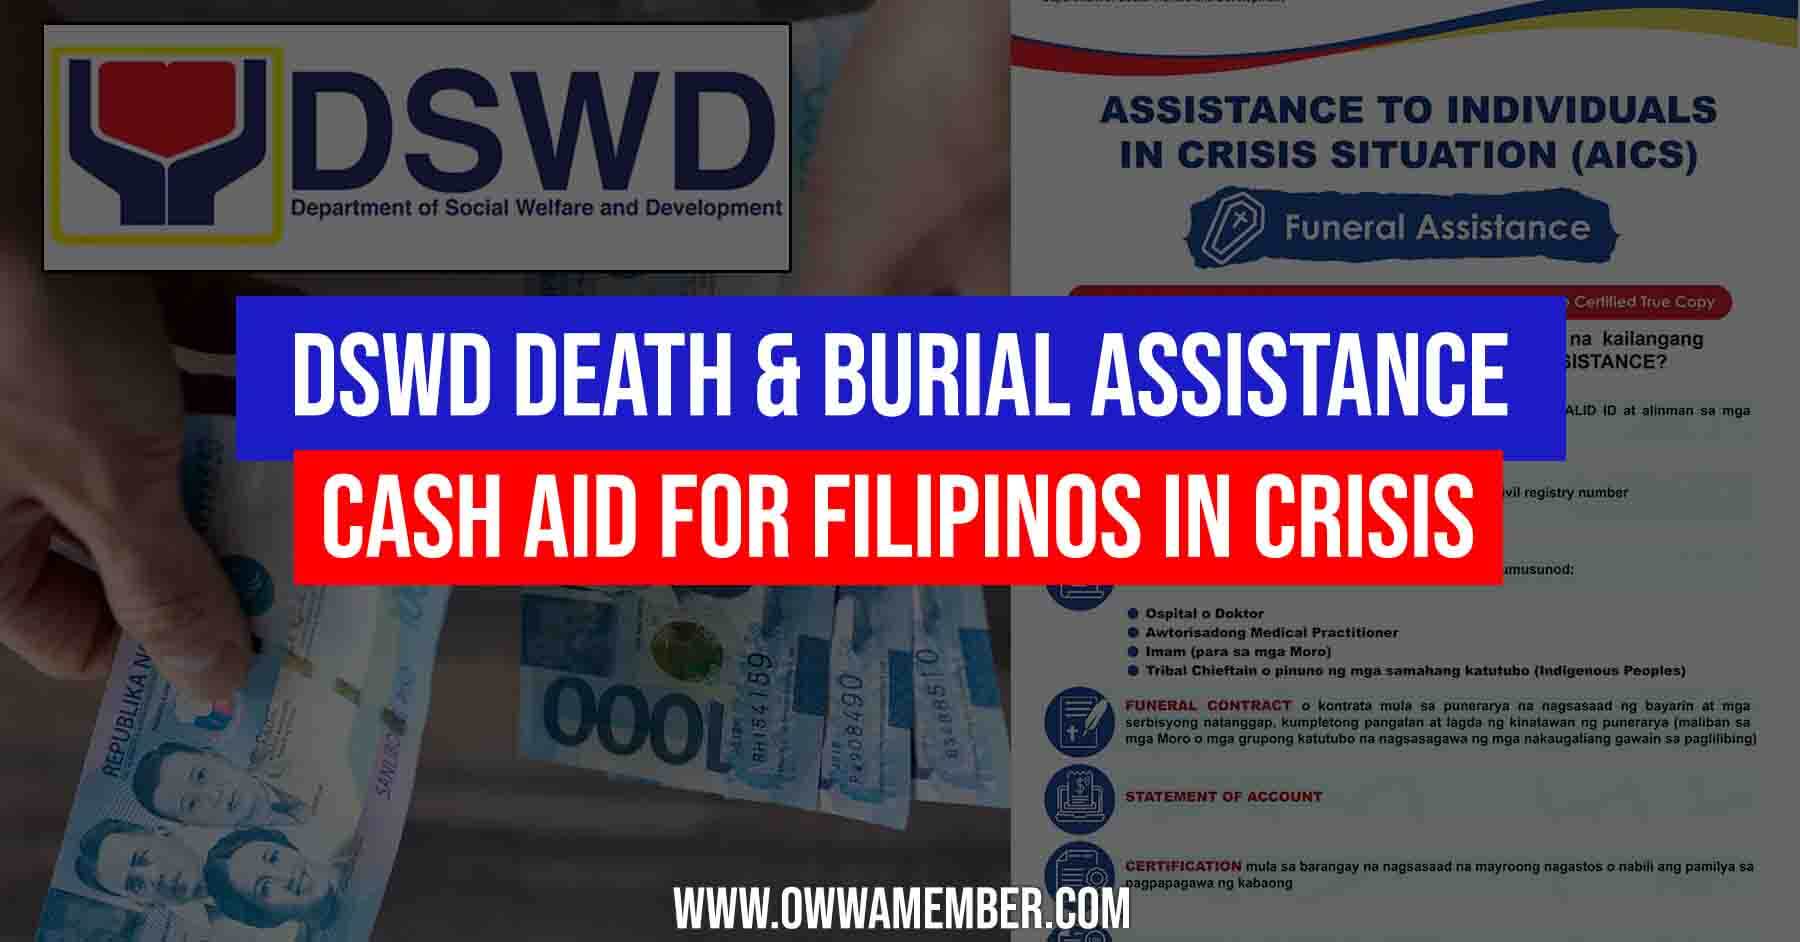 how to apply dswd death funeral burial cash assistance